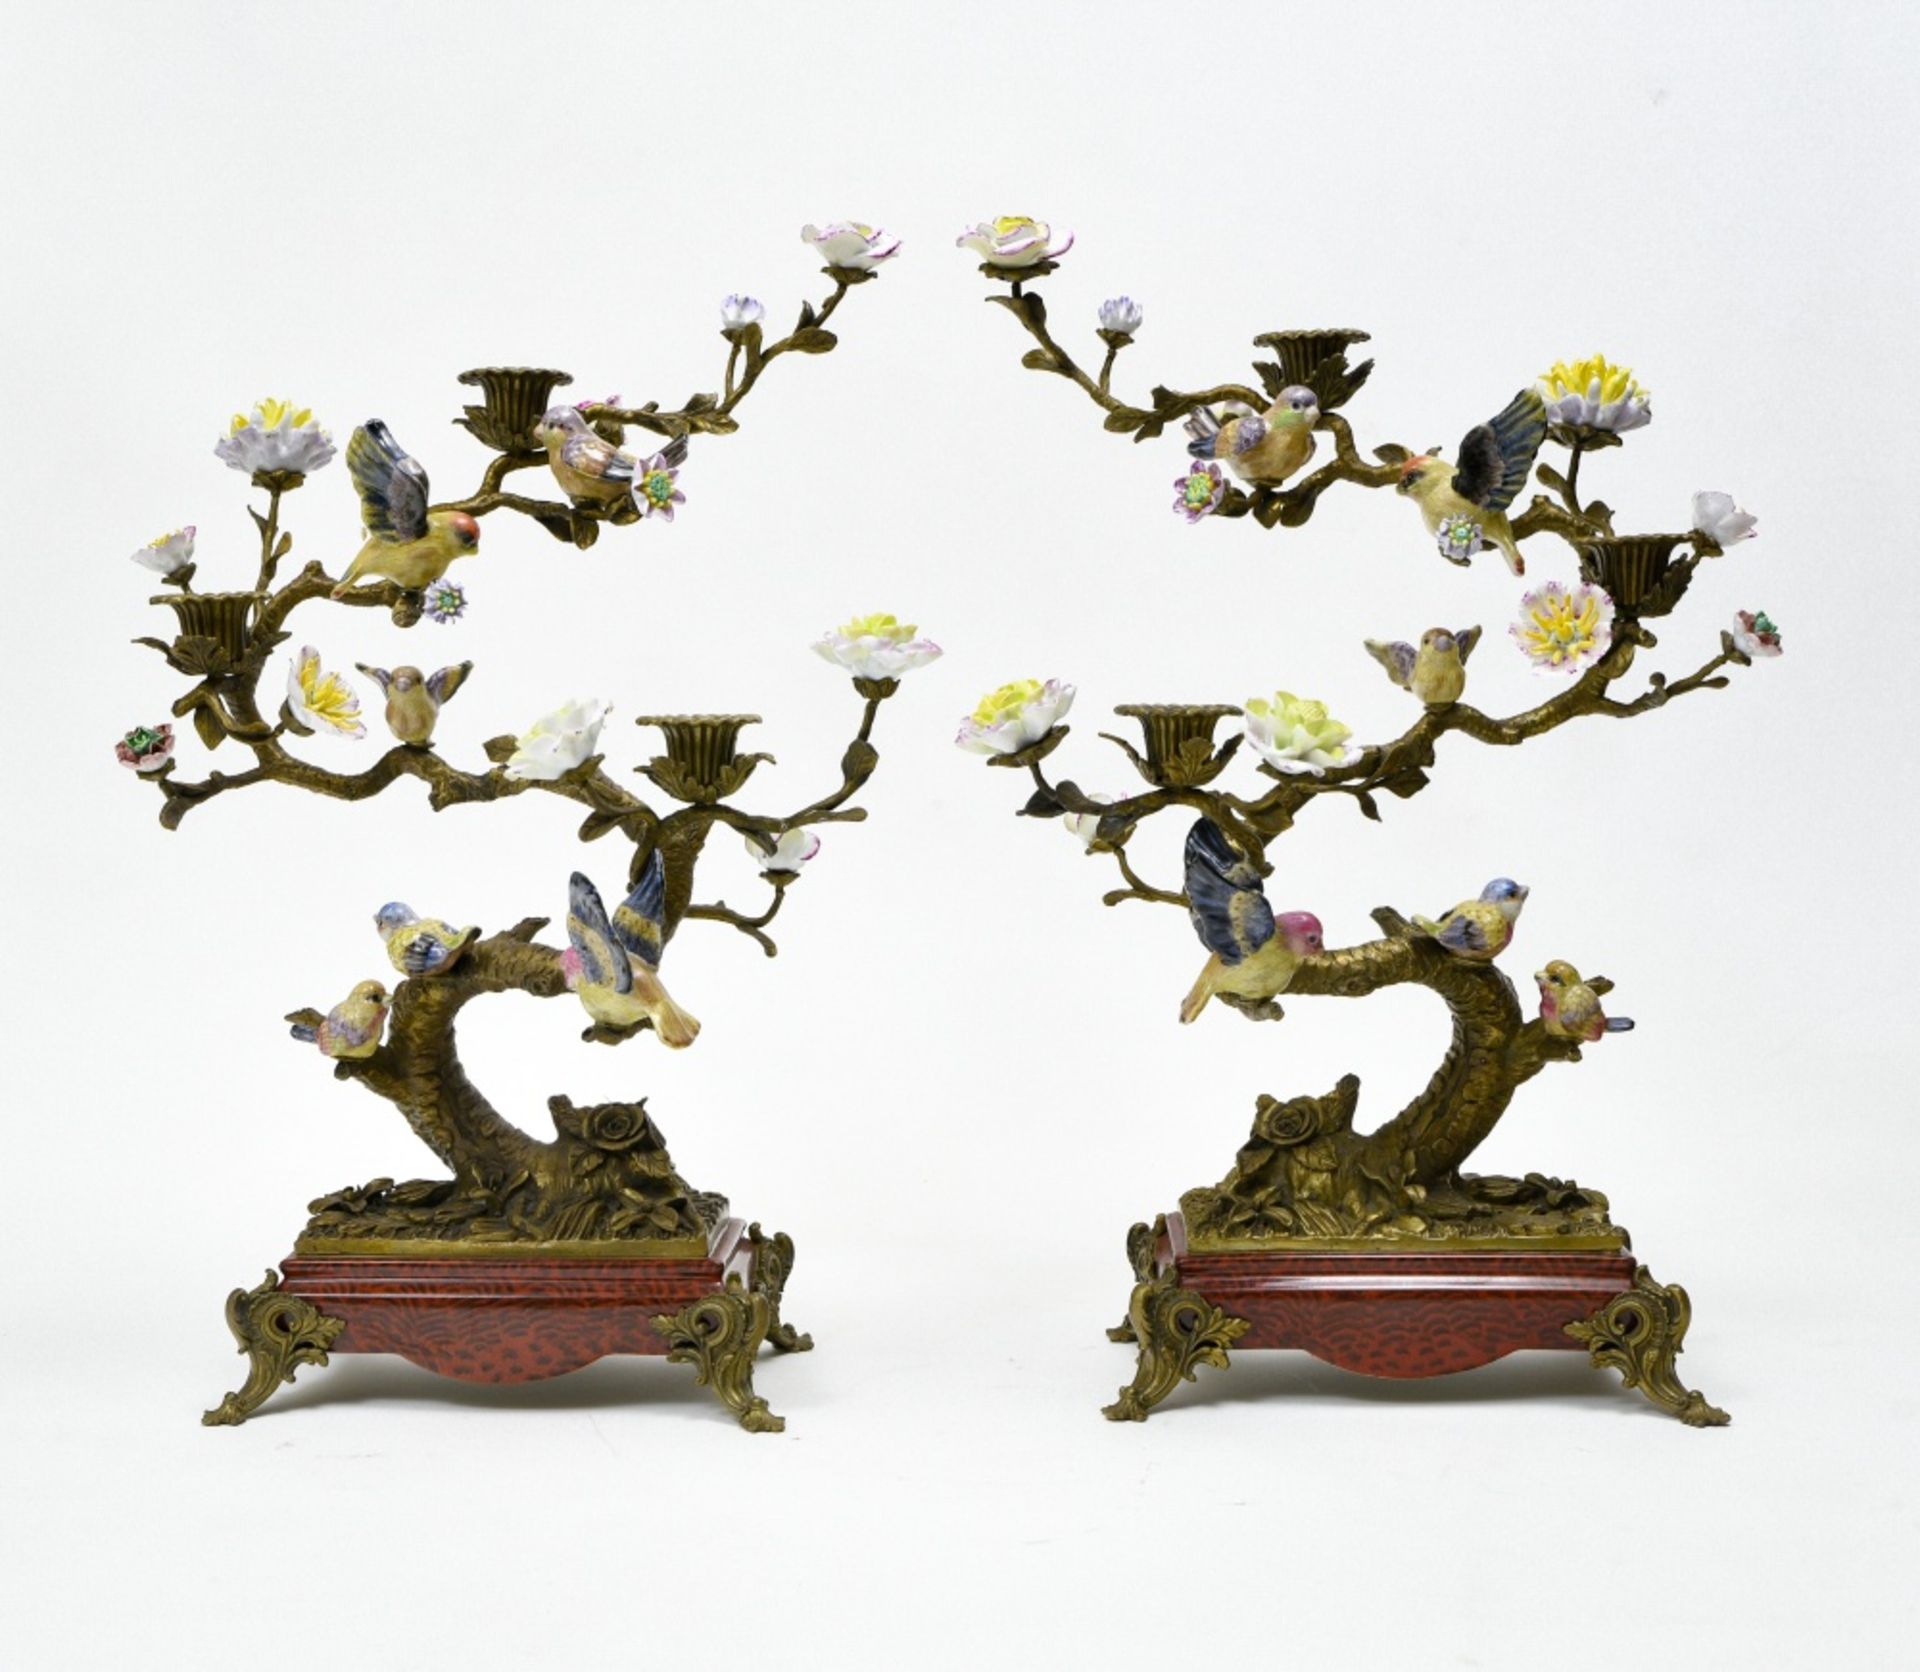 China, 20th century Pair of candelabras featuring birds, Bronze and porcelain. Mark under the base. - Image 2 of 2